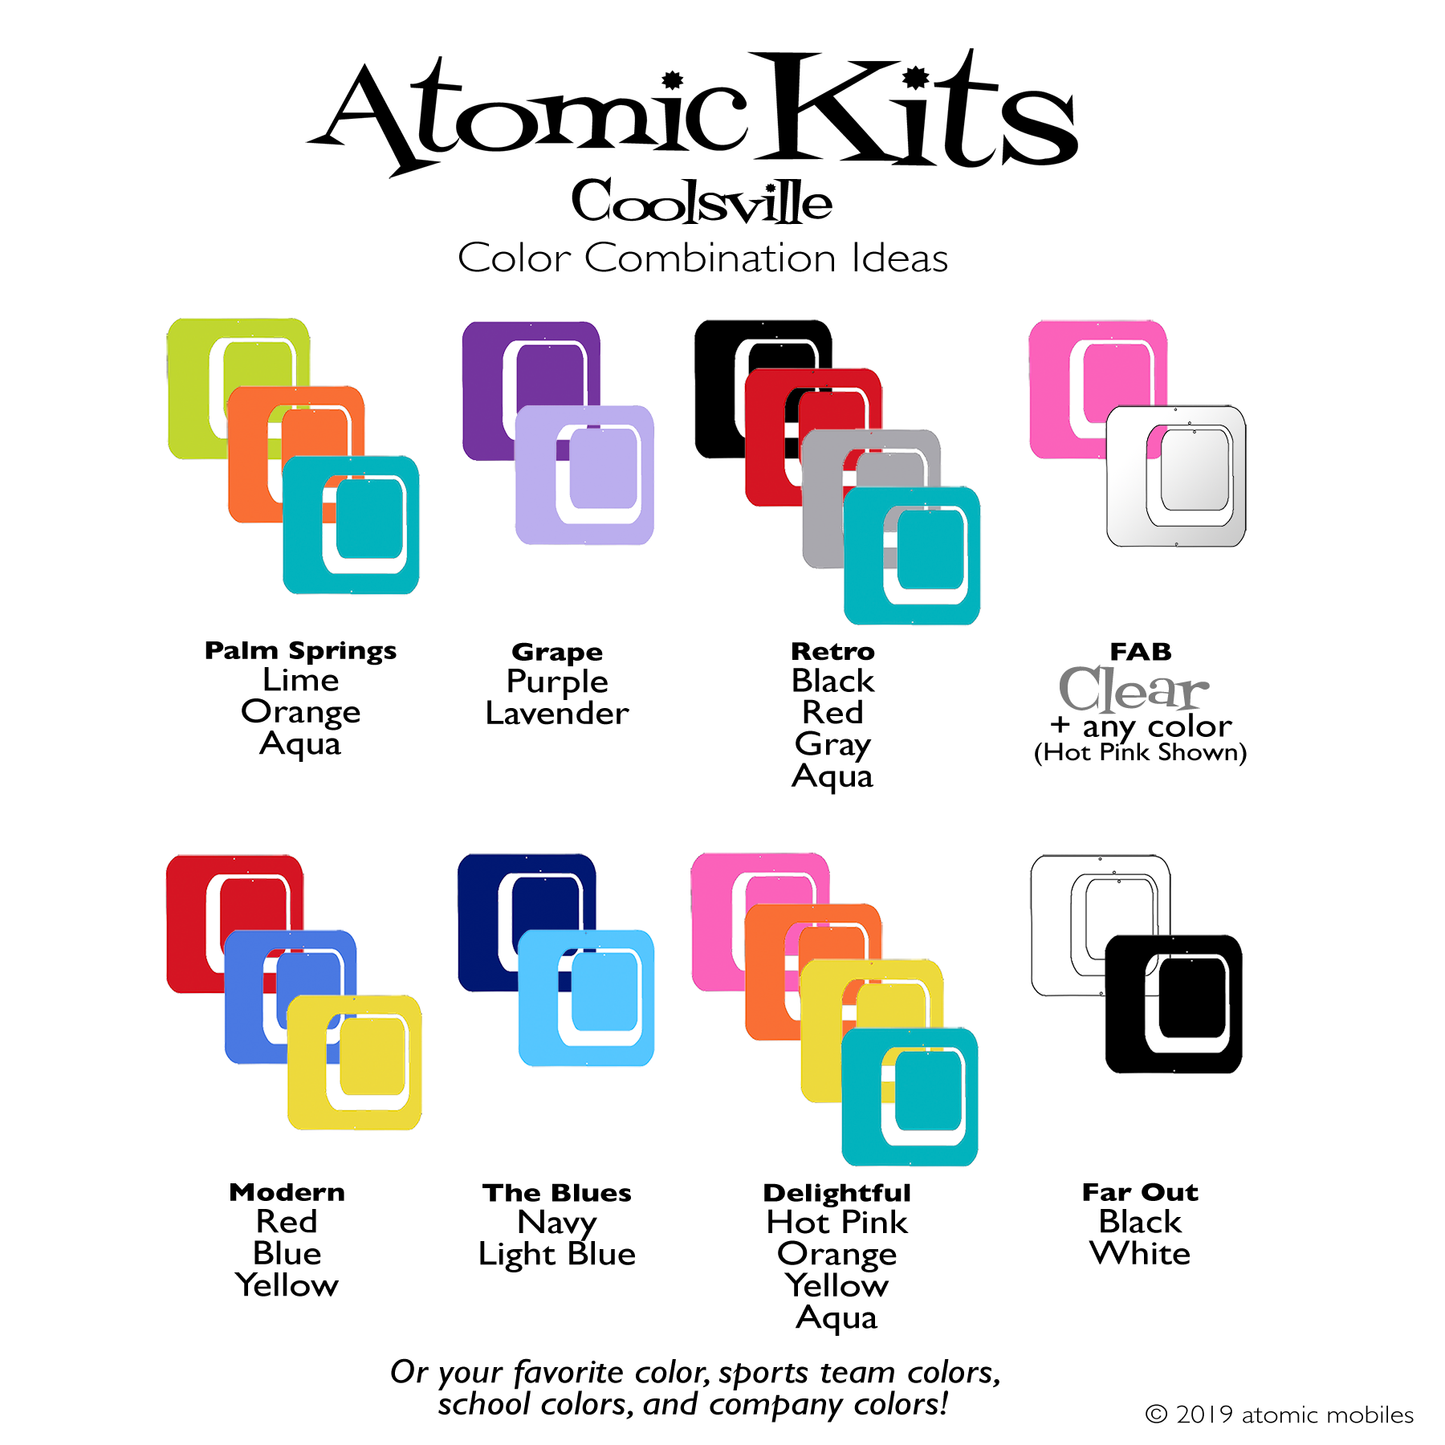 Coolsville Color Combination Ideas for Atomic Kits by AtomicMobiles.com